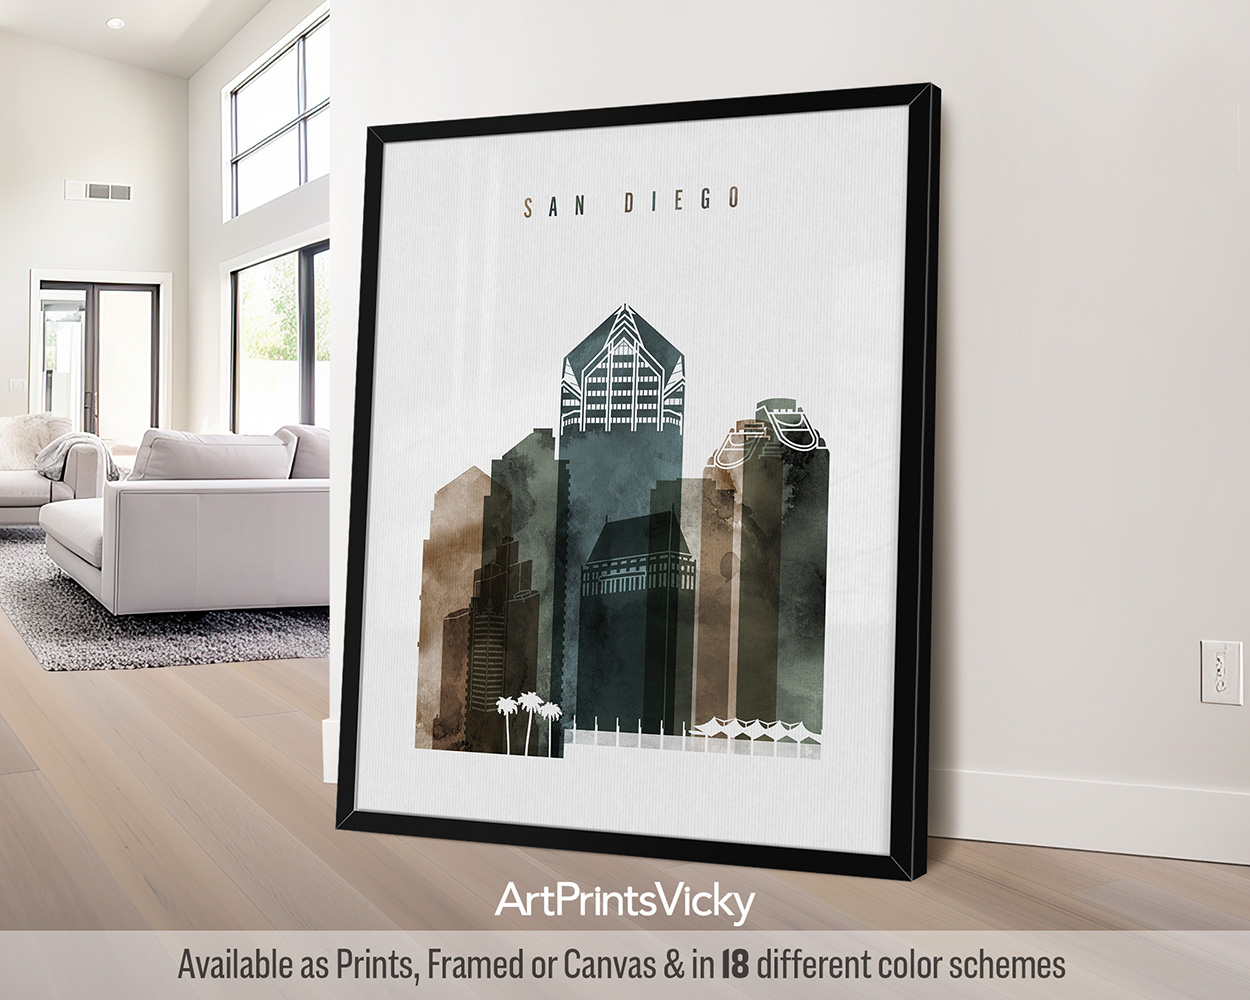 San Diego skyline featuring the iconic landmarks, and the vibrant cityscape in a warm and textured Earthy Watercolor 2 style, by ArtPrintsVicky.